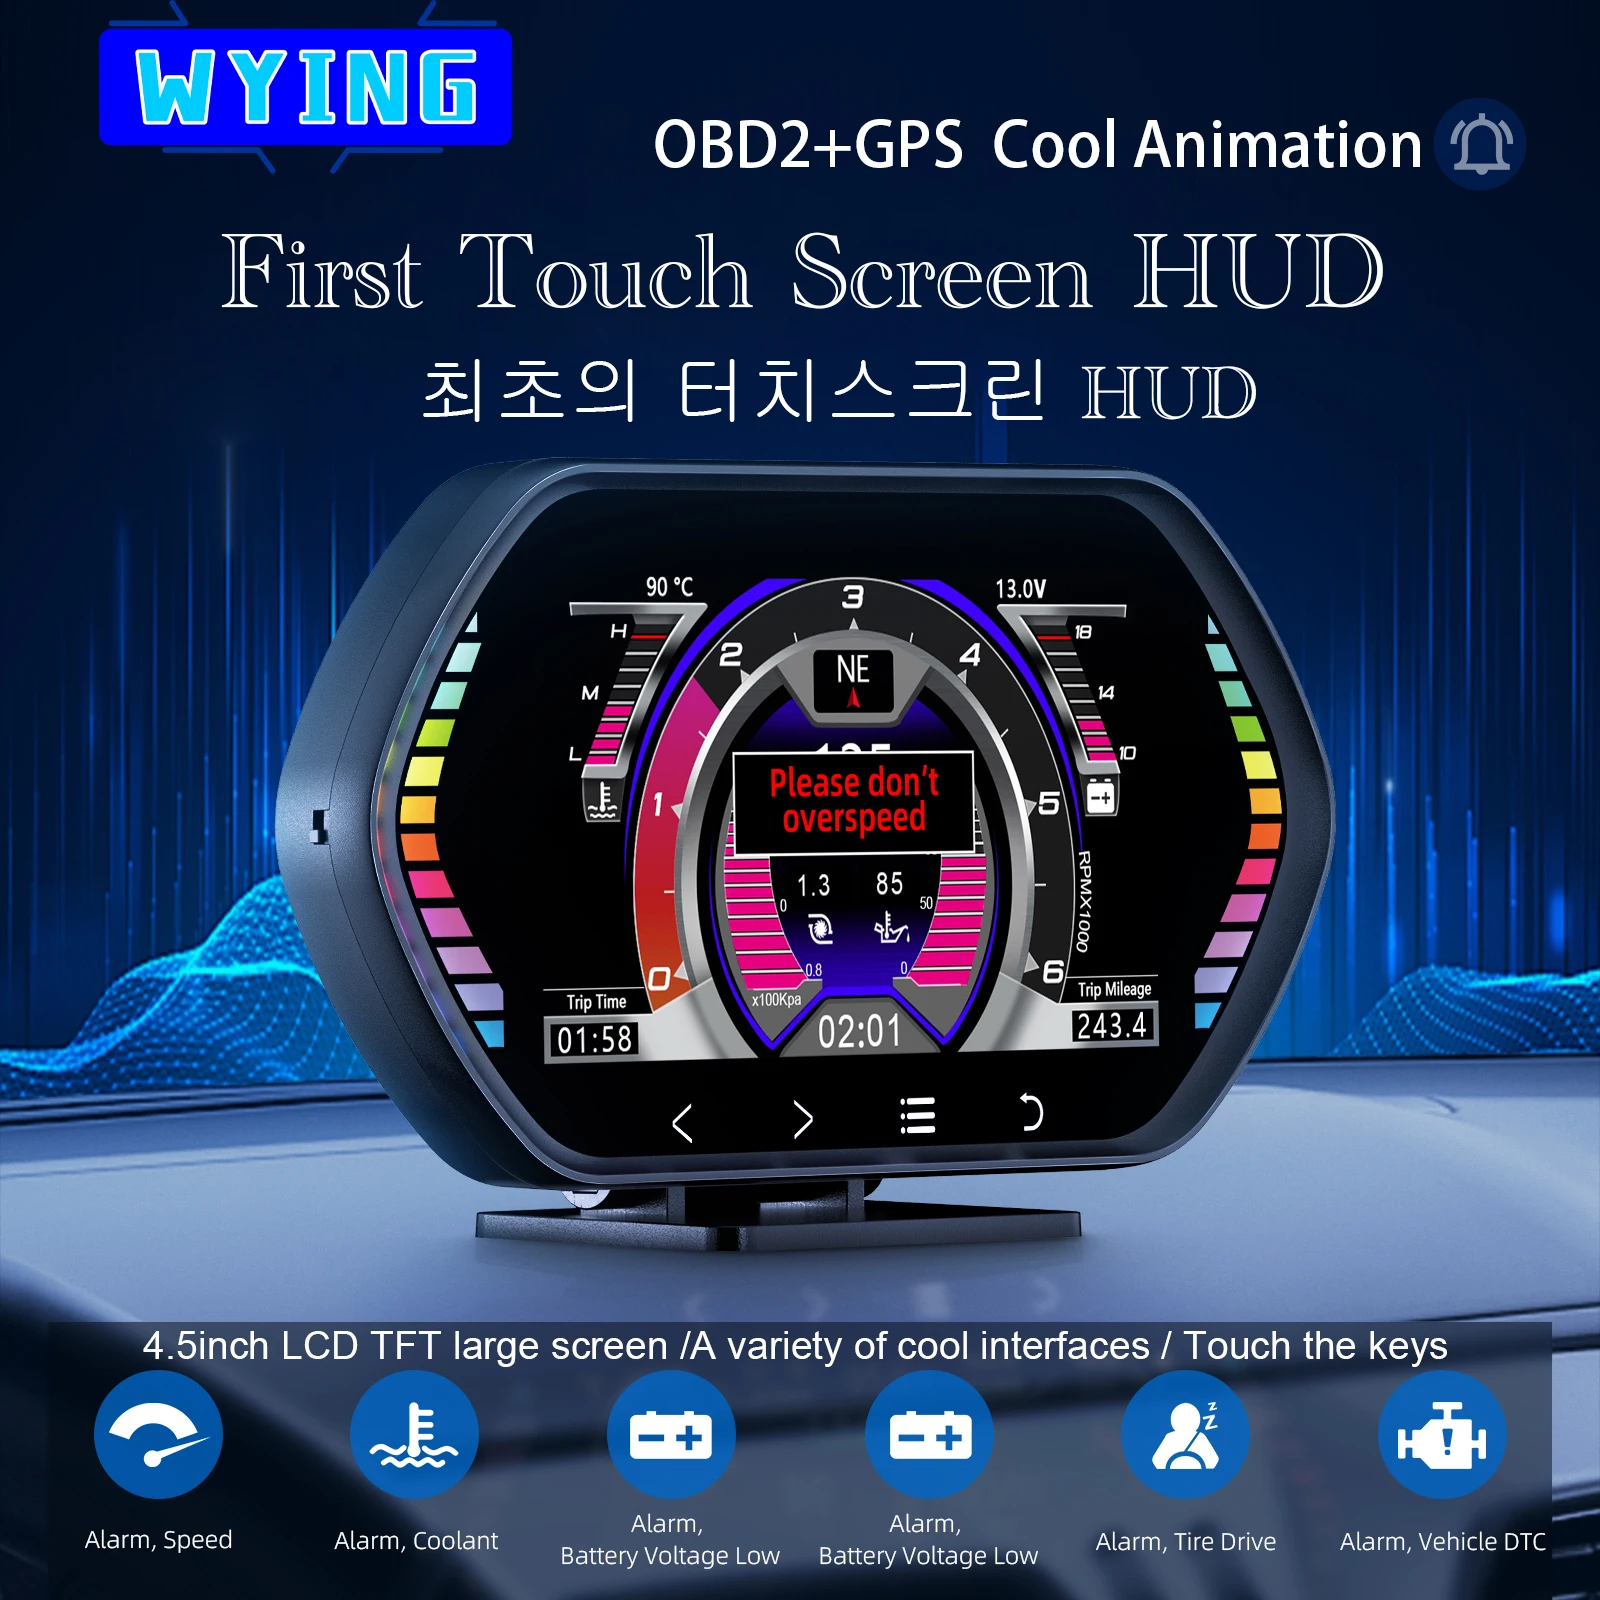 

WYING F12 Digital Car LCD HUD OBD2 GPS Touchscreen Head Up Display Slope meterSpeed Alarm Oil Temp Fuel KM/H MPH of All Cars